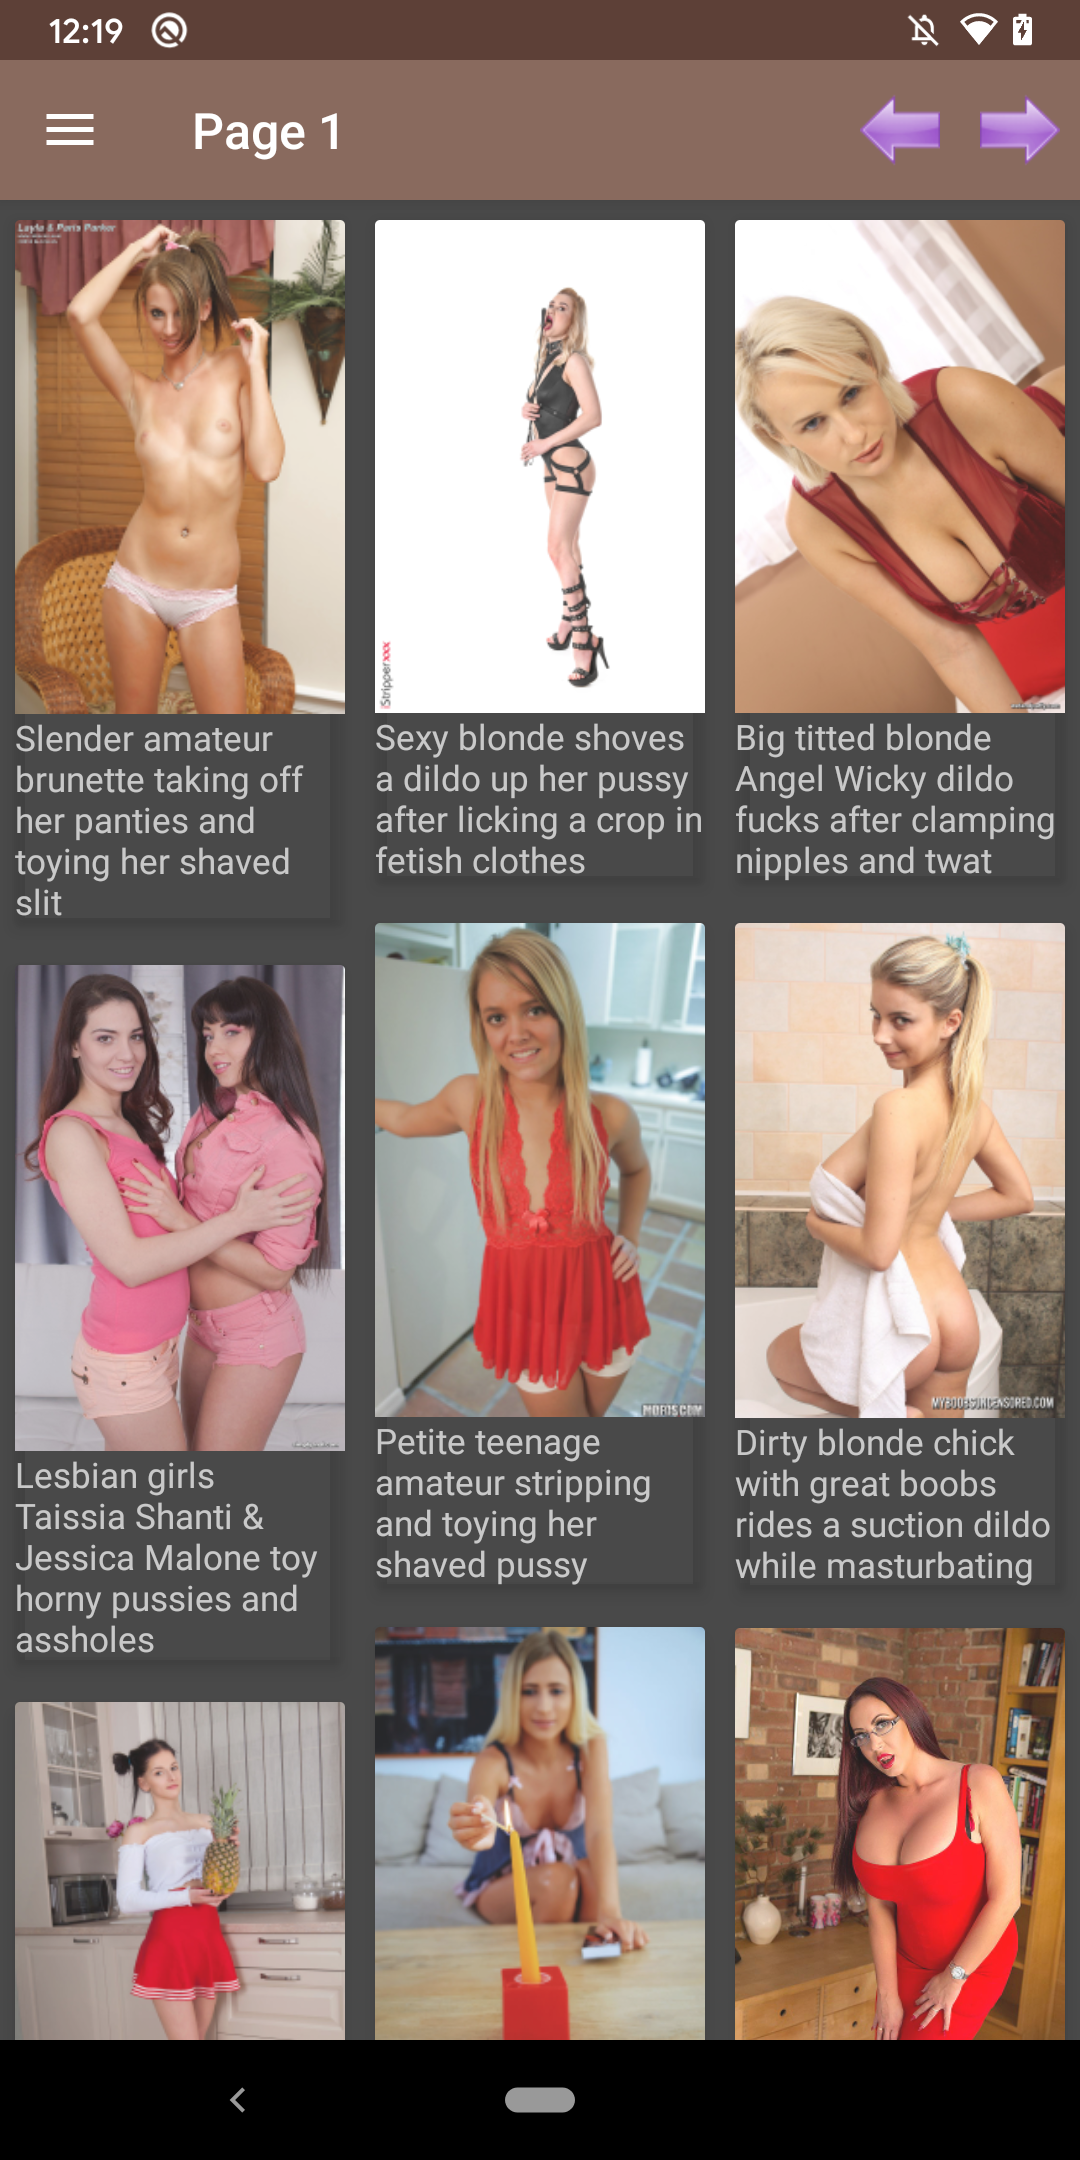 Dildo Galleries app,galleries,android,download,cosplay,comixharem,apps,apk,dildo,viewer,anime,best,amateurs,titties,collections,hentia,pictures,photos,hentai,nhentai,daily,pron,gallery,sexy,pornstars